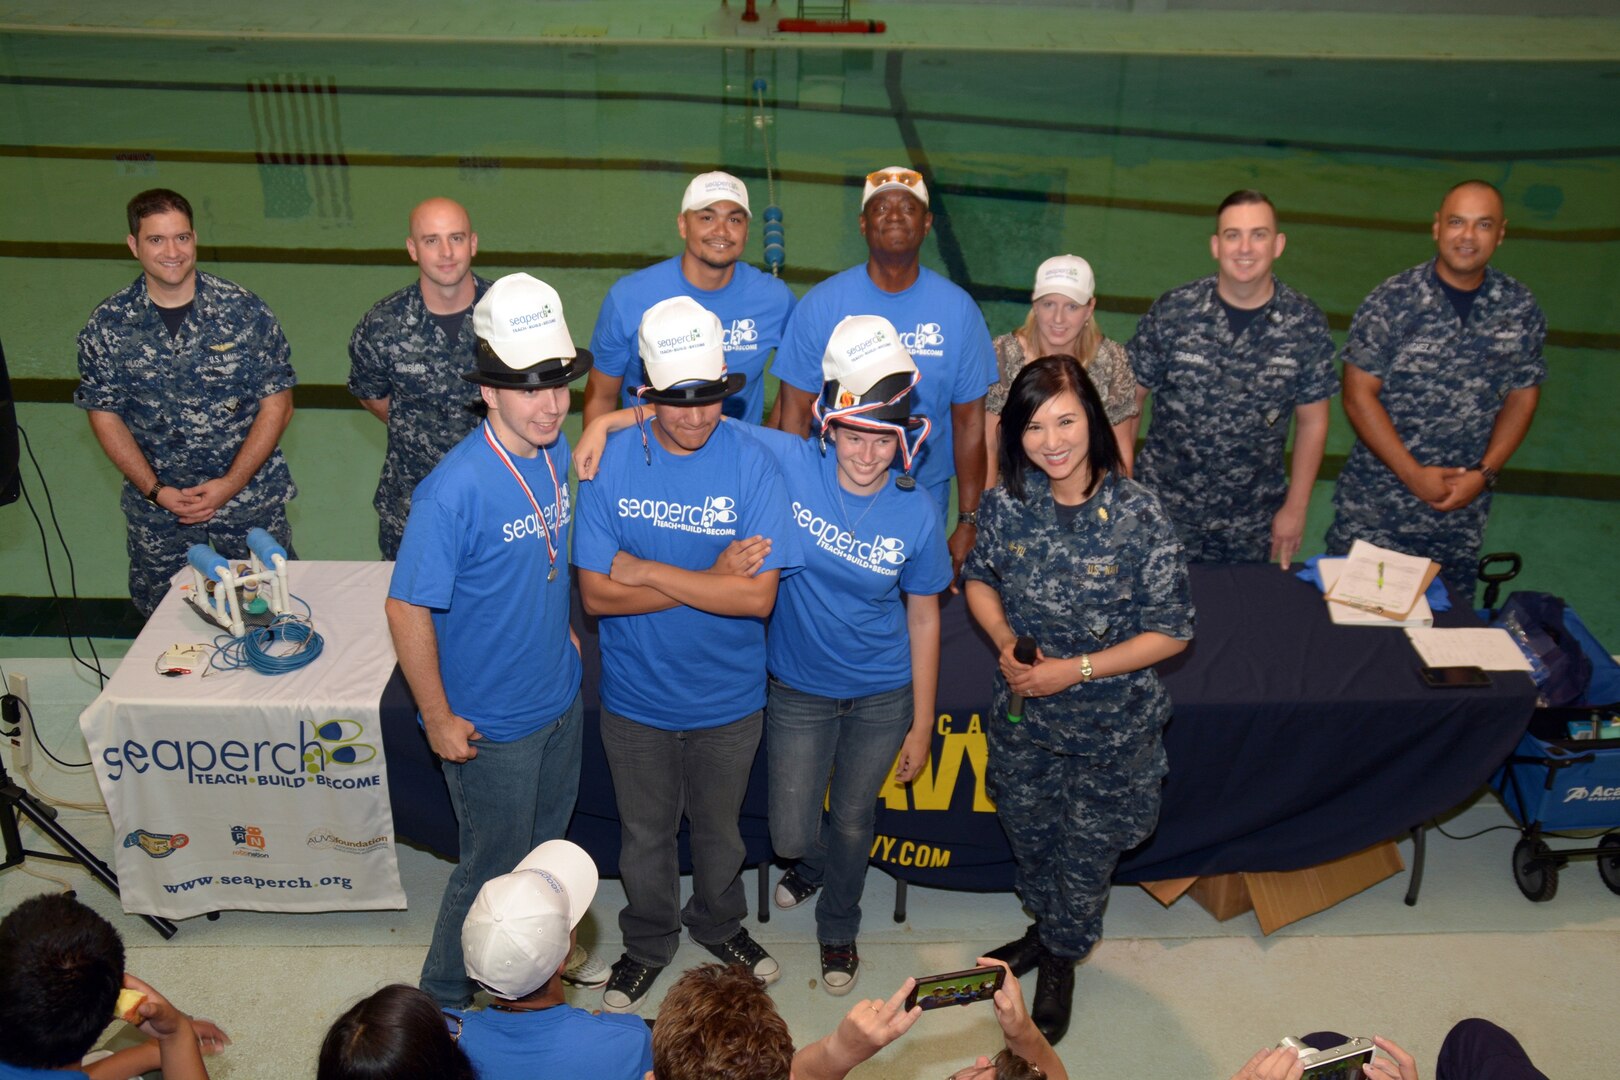 Houston native Lt. Diana Tran-Yu, assigned to Navy City Outreach Southwest Region, stands with Team Sub-Zero, who placed first in a SeaPerch scrimmage held at the Eastside Branch Boys & Girls Club July 27. The event was held on the final day of the SeaPerch Regional Challenge Prep Camp hosted by Northeast Lakeview College and the Boys & Girls Clubs of San Antonio, in cooperation with Navy City Outreach Southwest Region and Navy Recruiting District (NRD) San Antonio. The scrimmage consisted of the Speed Obstacle and Challenge Courses. 